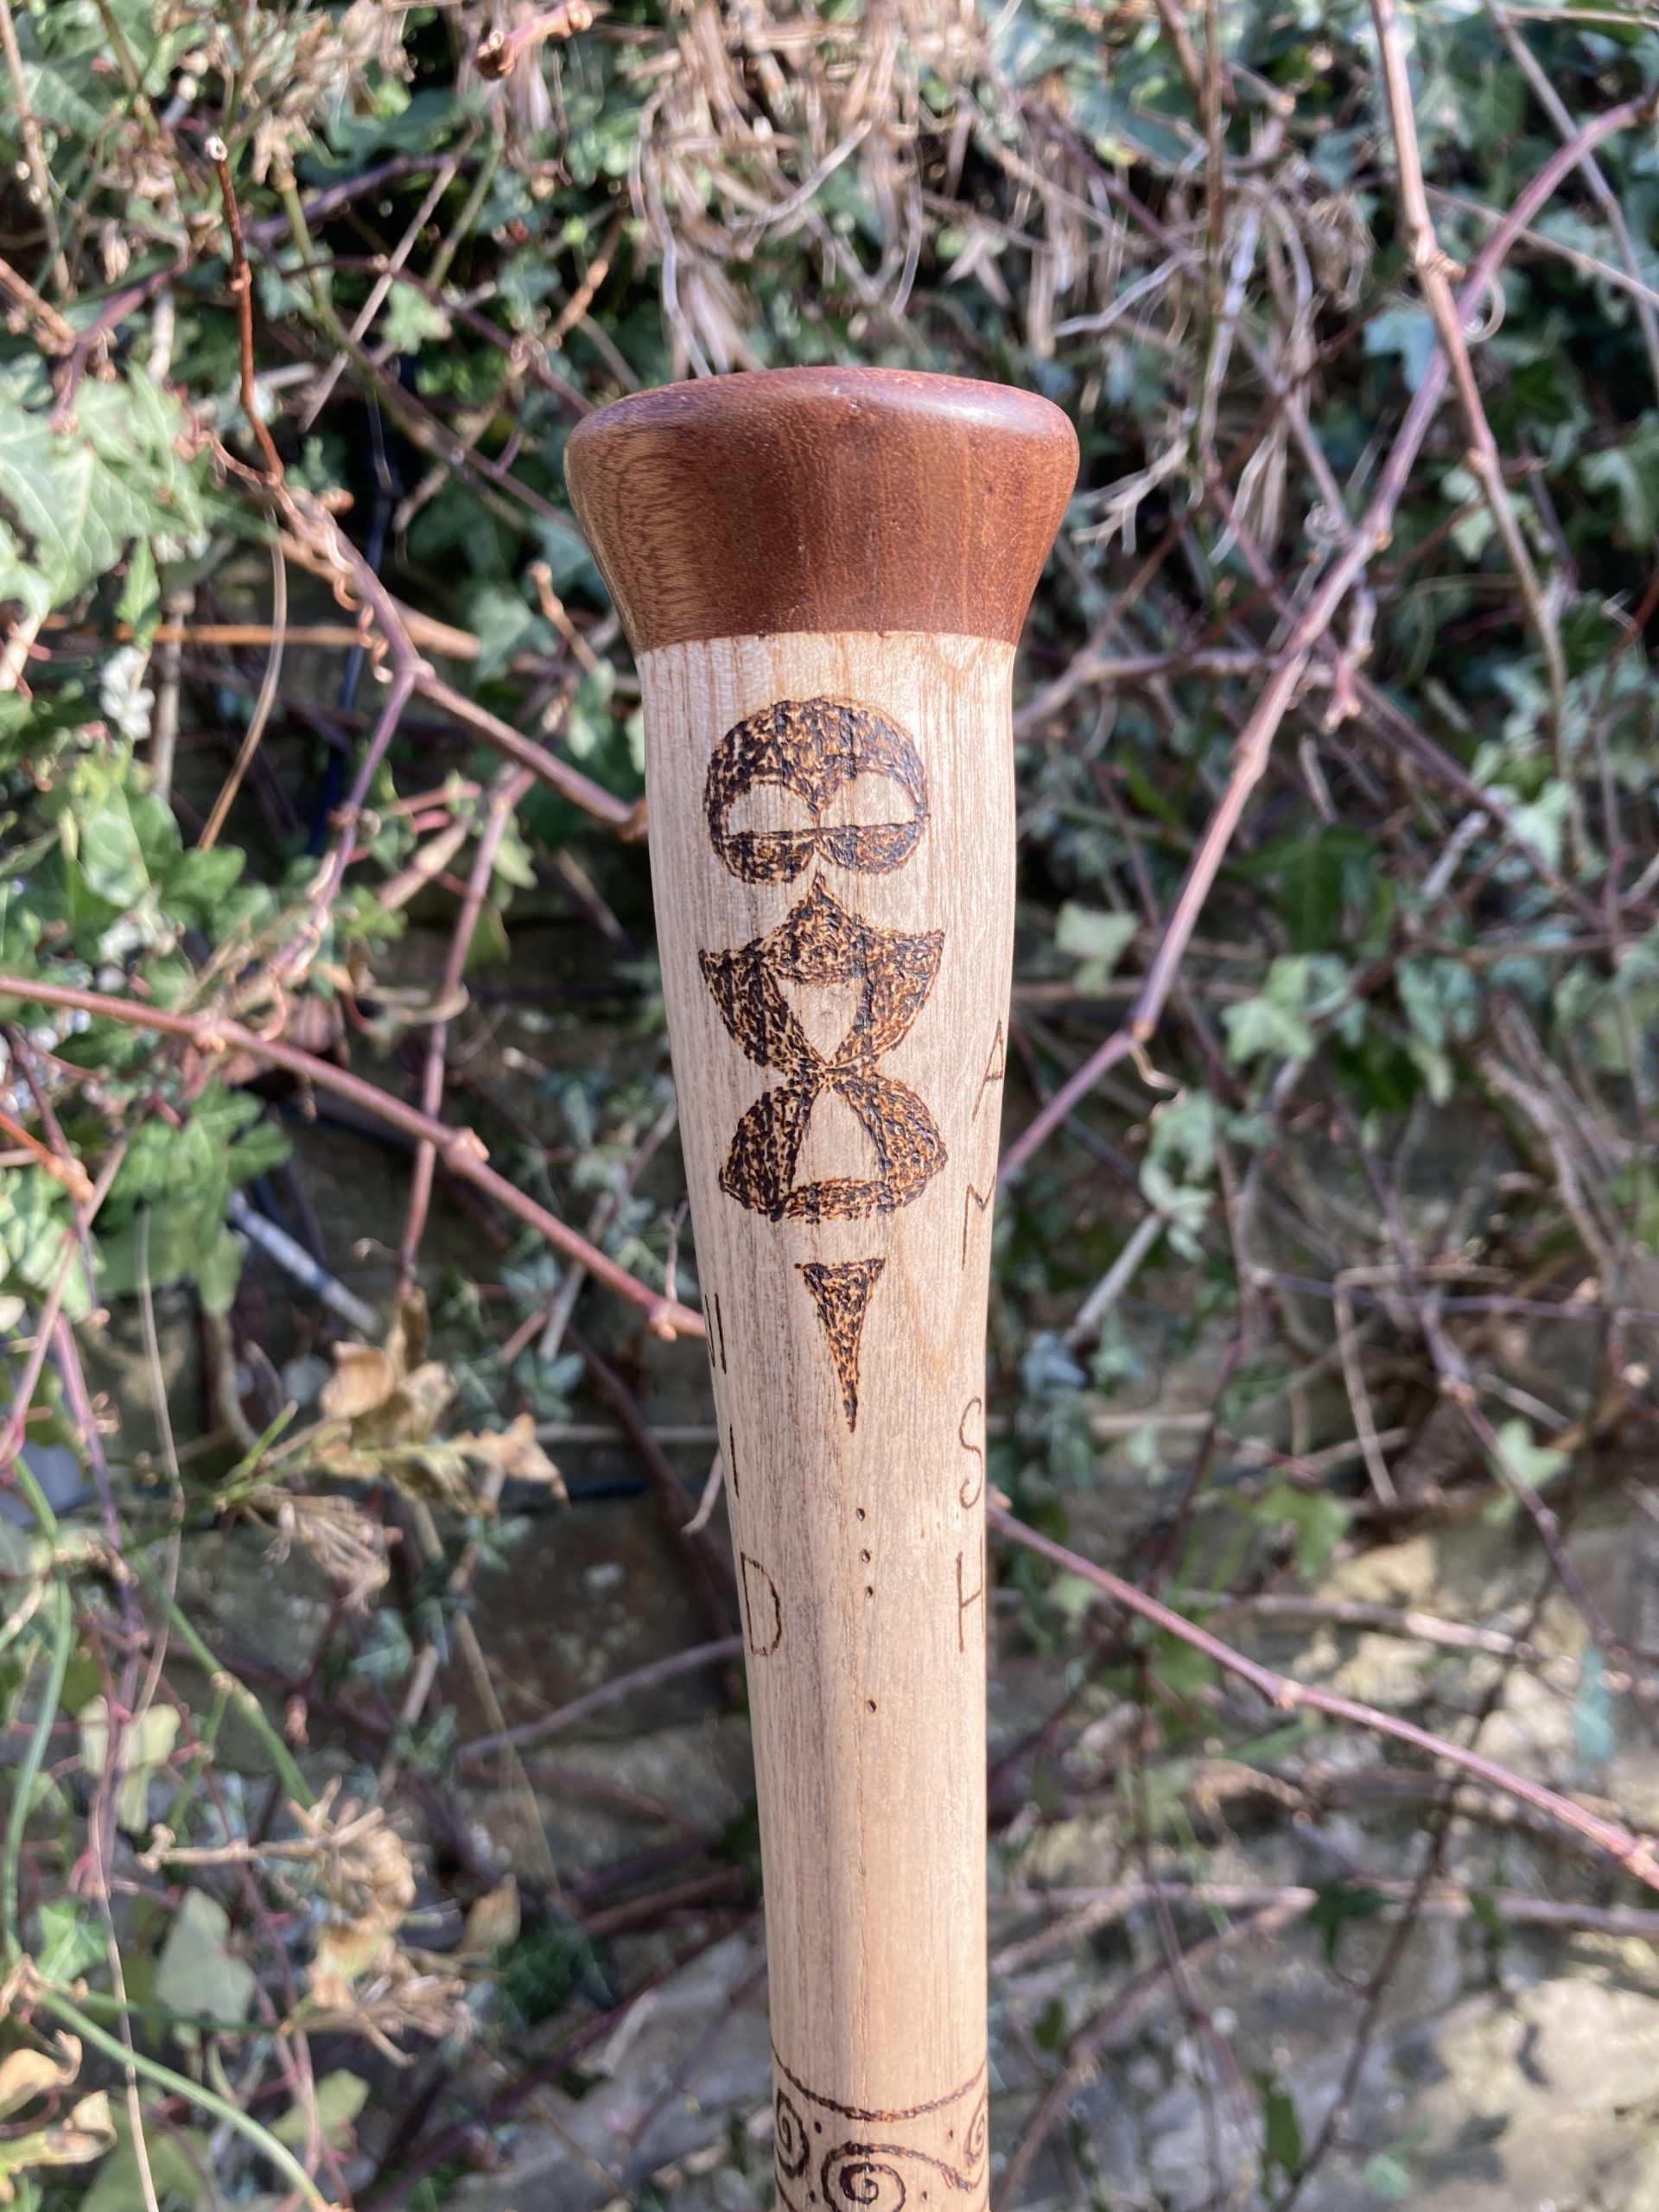 Dark pyrographic heavy lined images on a wooden staff, inspired by Iron Age Celtic art. Blurred background is plants and dirt.